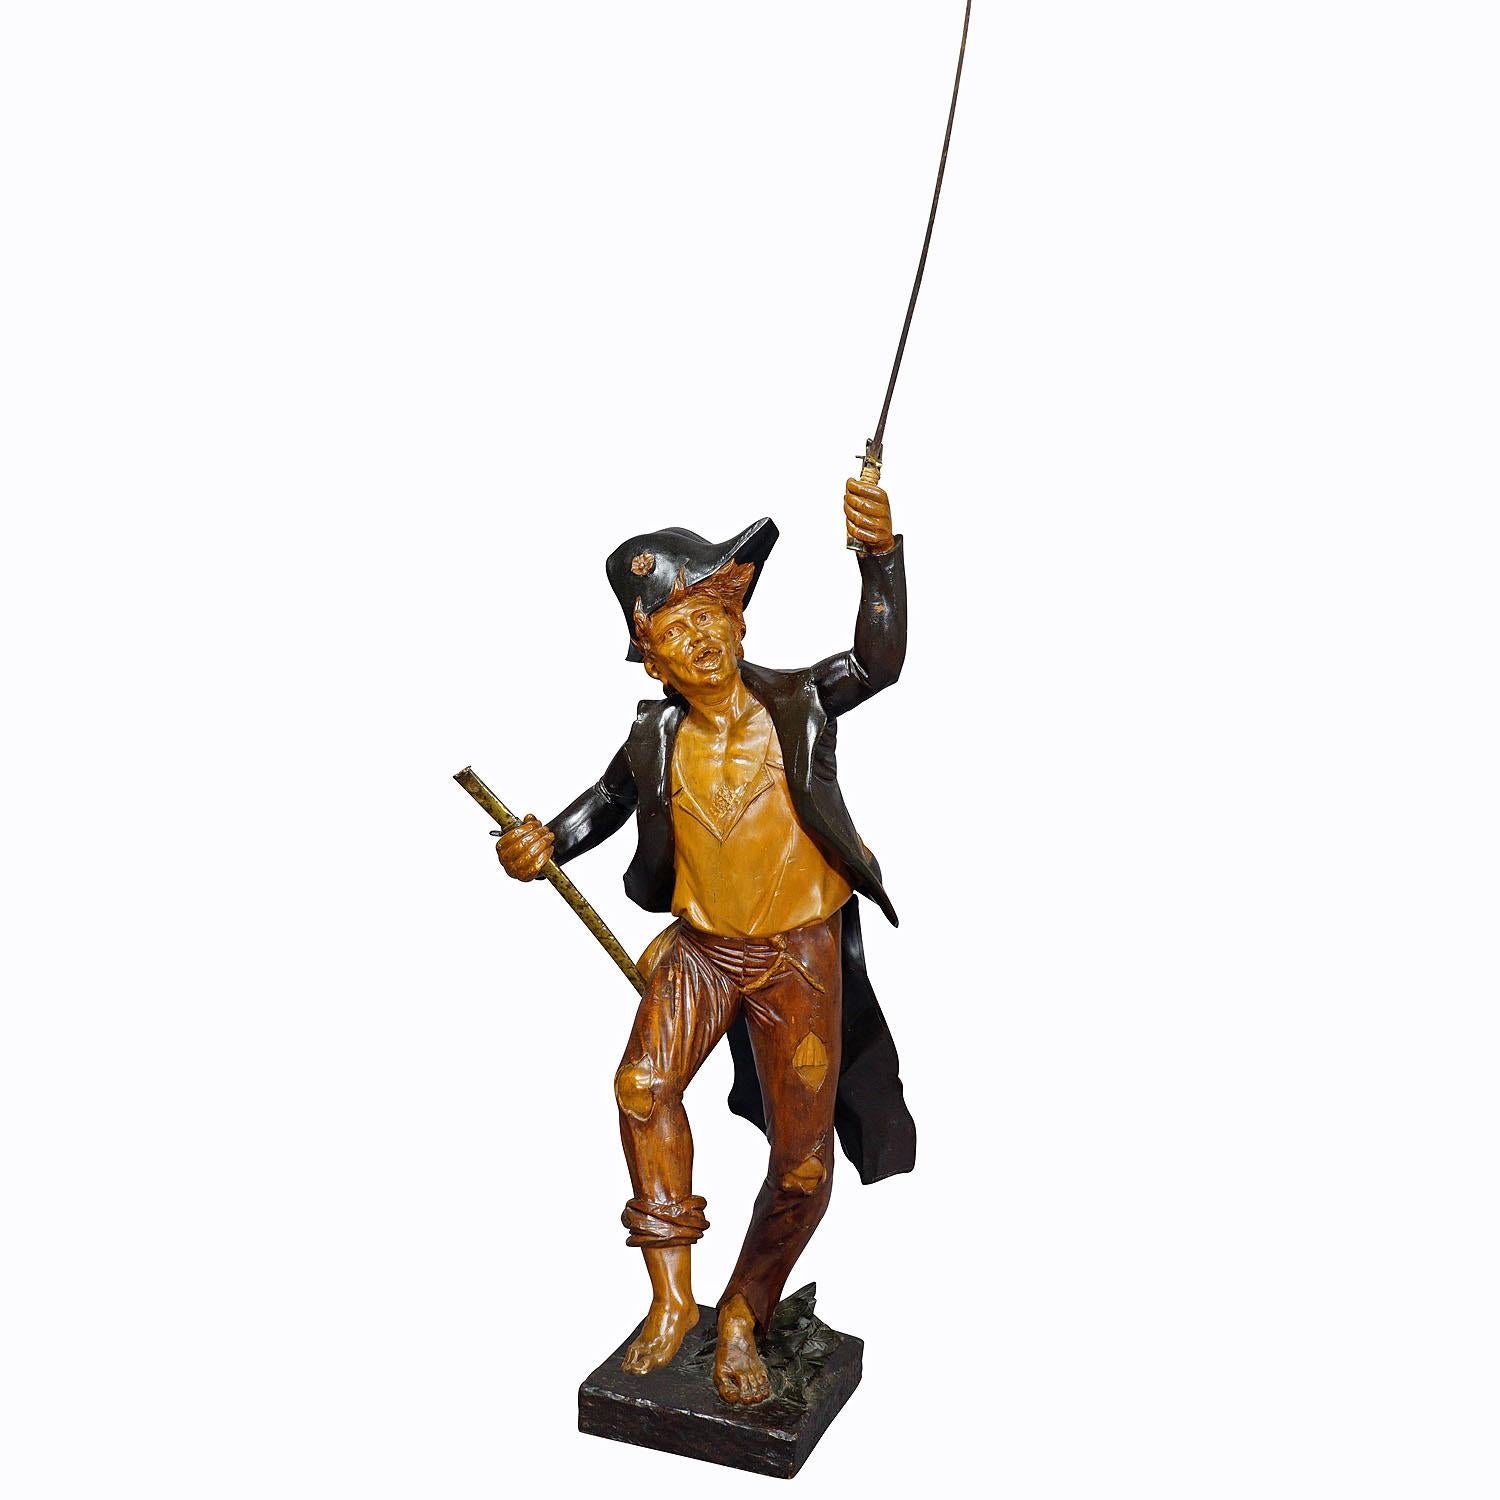 Large Antique Statue of a French Freedom Fighter ca. 1920s

A large wooden French freedom fighter statue holding a metal saber. The hand-made sculpture was handcarved most probably in France around 1920. Height figure without saber: 56.3' inches